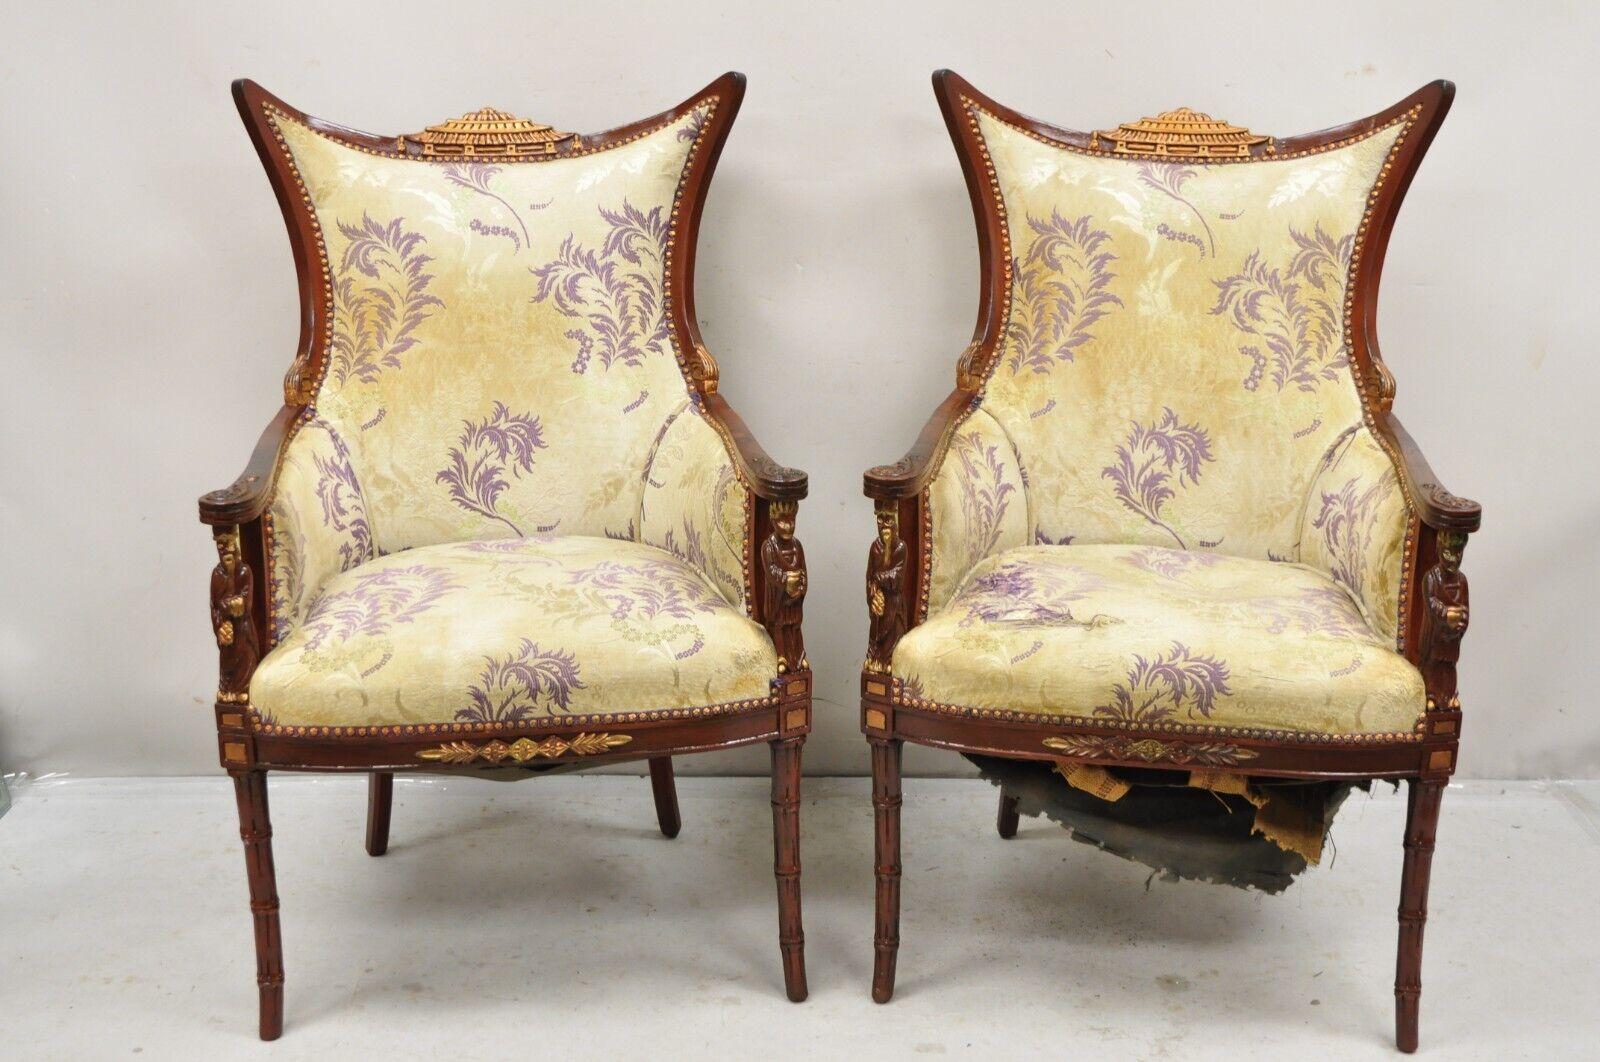 Vintage Chinoiserie Pagode Figurale Sculptée Acajou Fireside Parlor Lounge Chairs - Pair. Circa Early to Mid 20th Century. 43